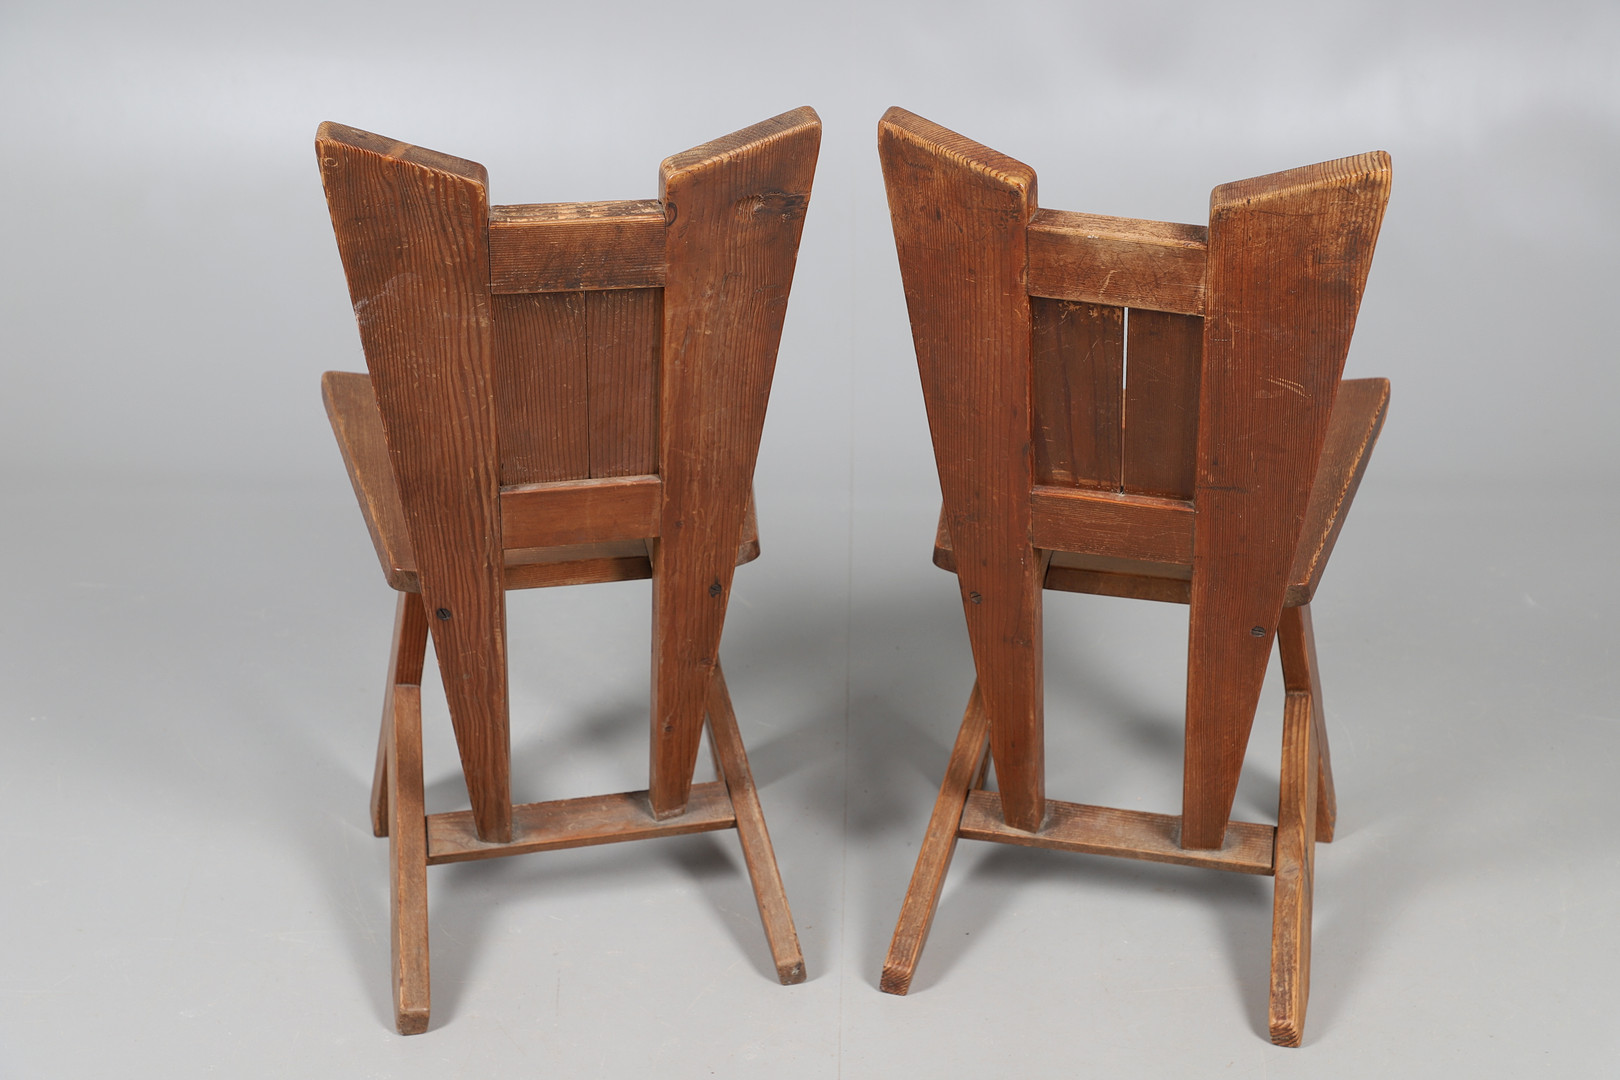 PAIR OF ARTS & CRAFTS DUTCH AMSTERDAM SCHOOL SIDE CHAIRS. - Image 7 of 7